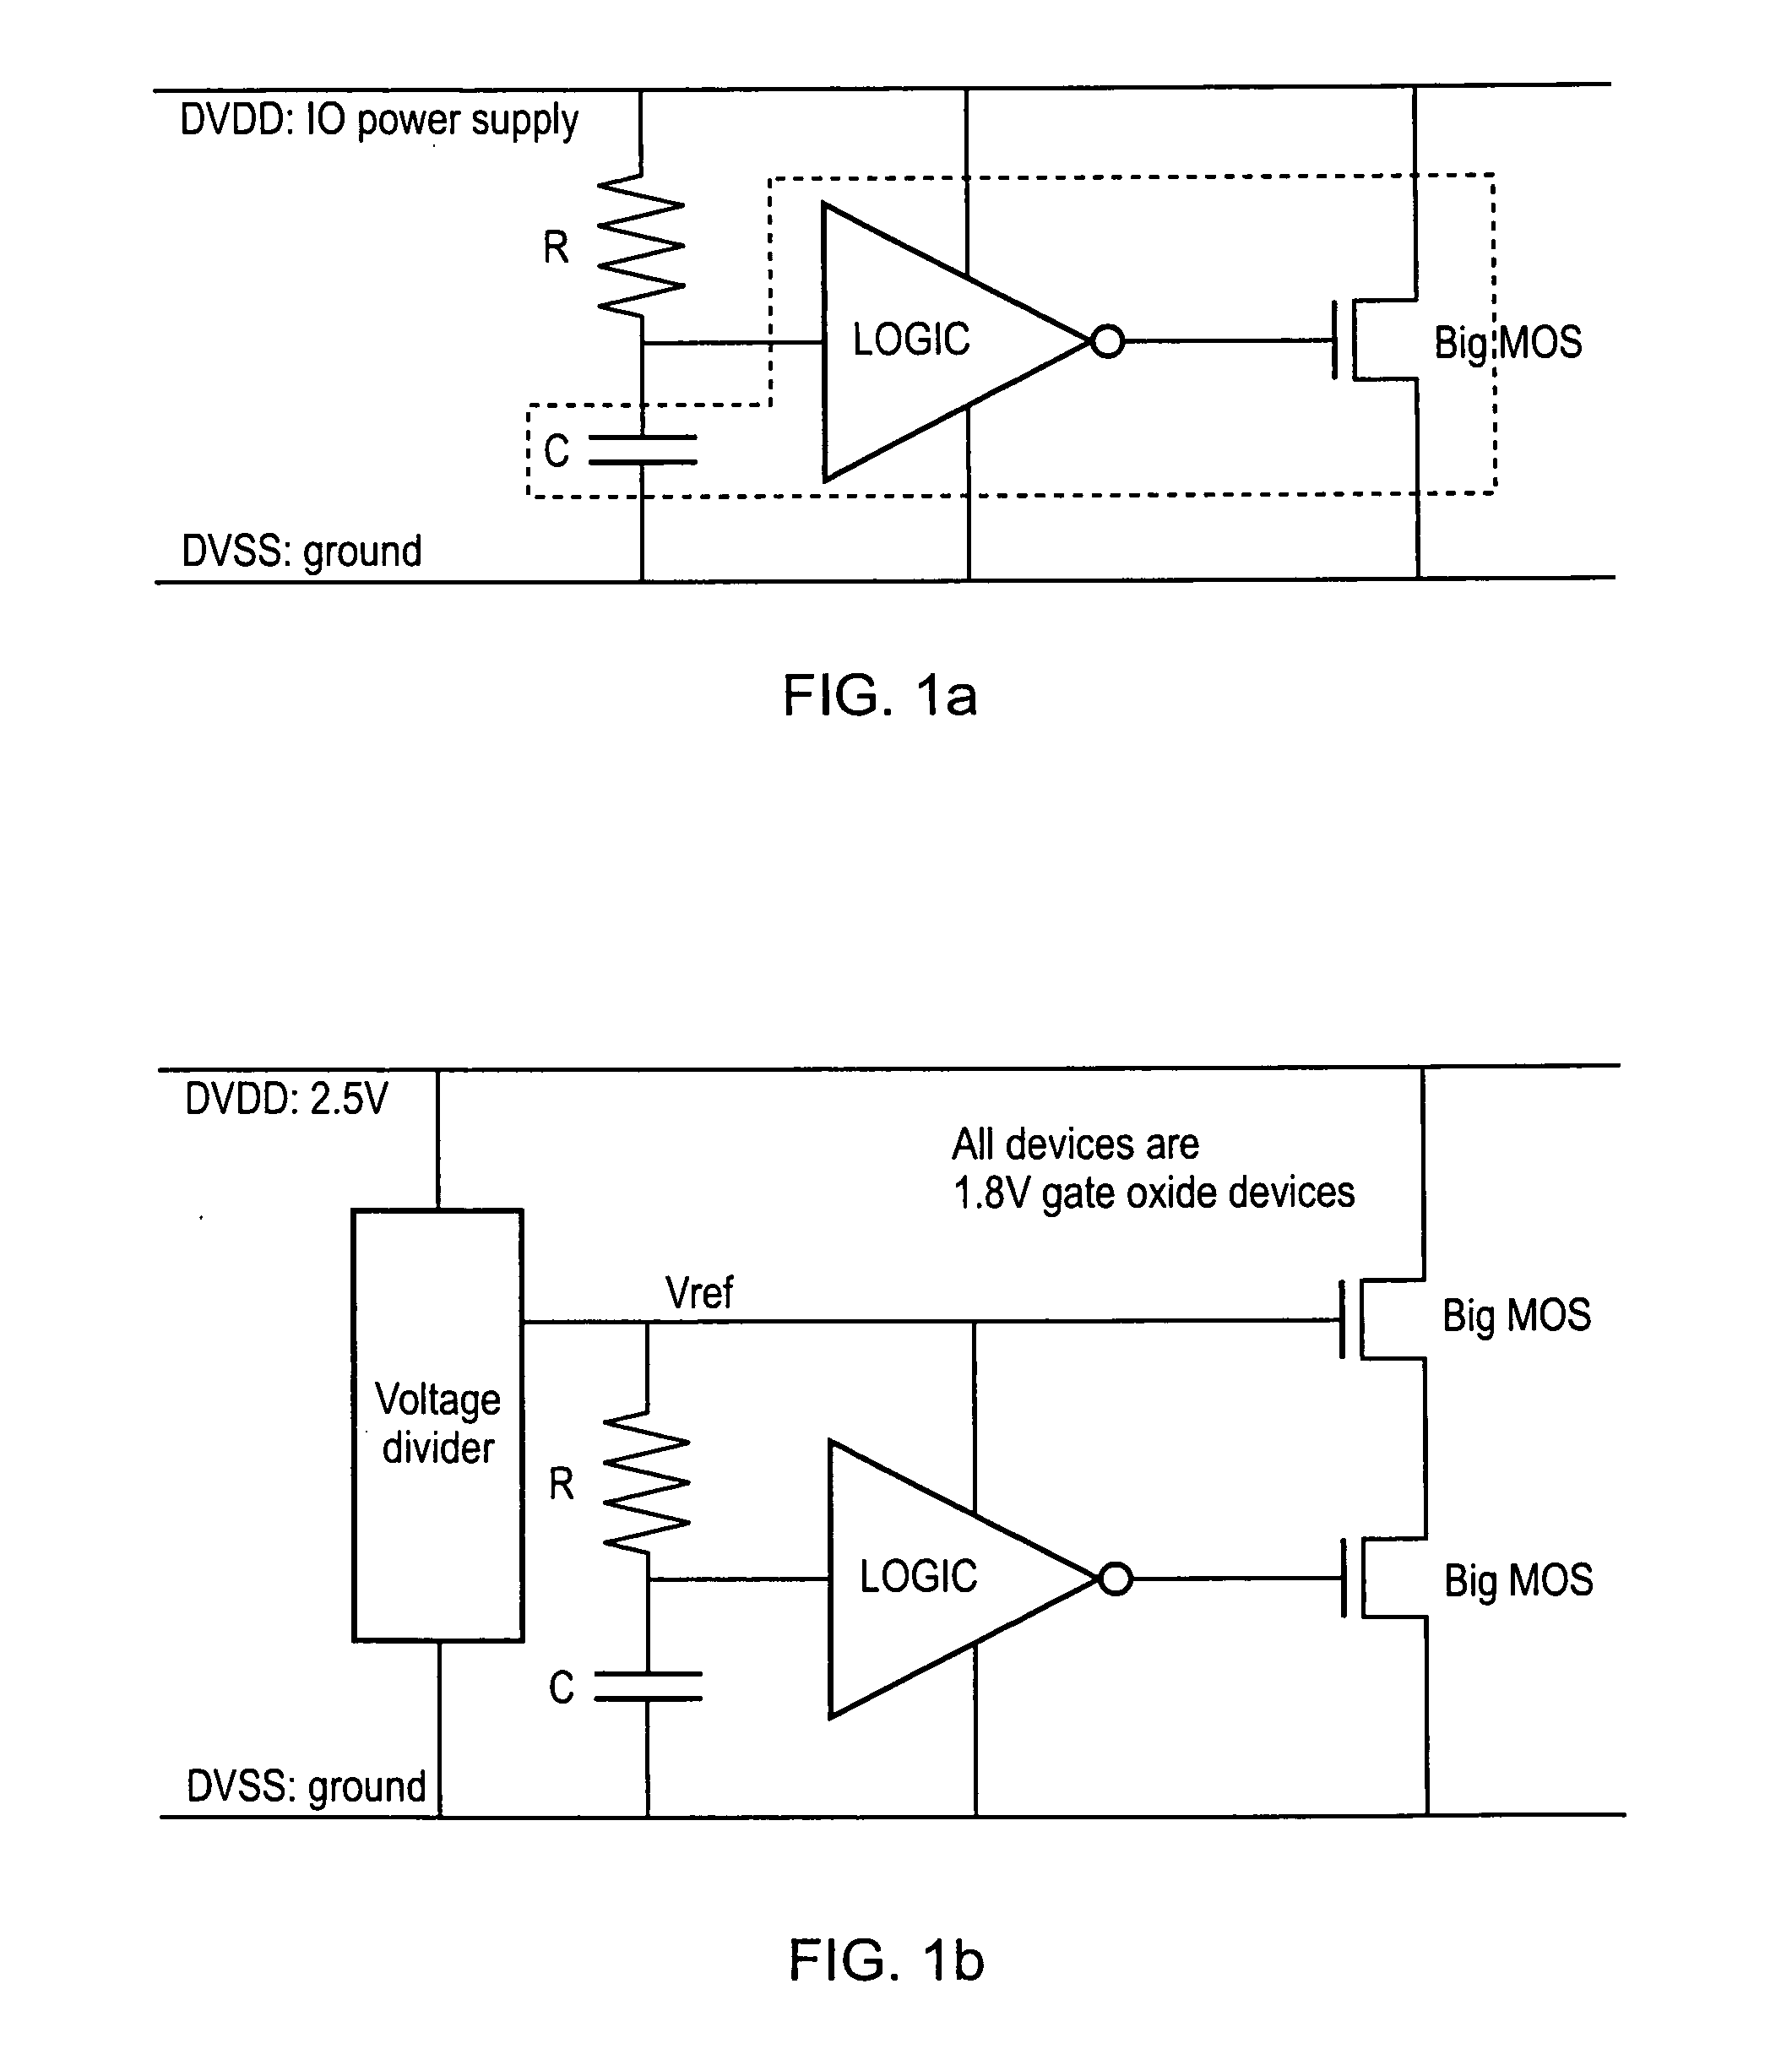 Electrostatic discharge protection device having an intermediate voltage supply for limiting voltage stress on components